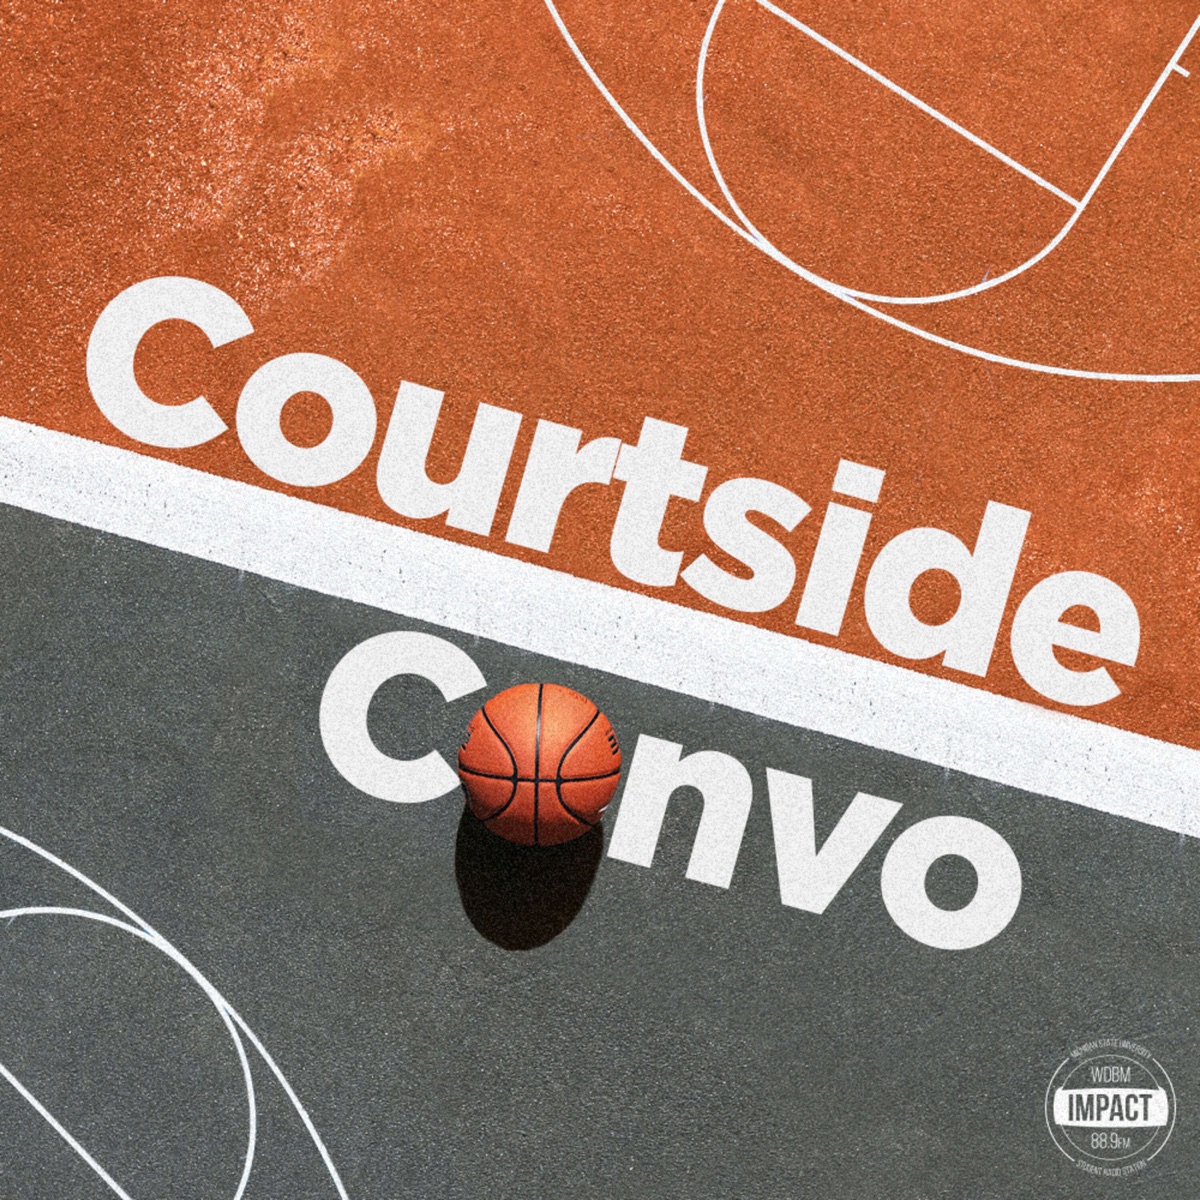 The City Courtside Report